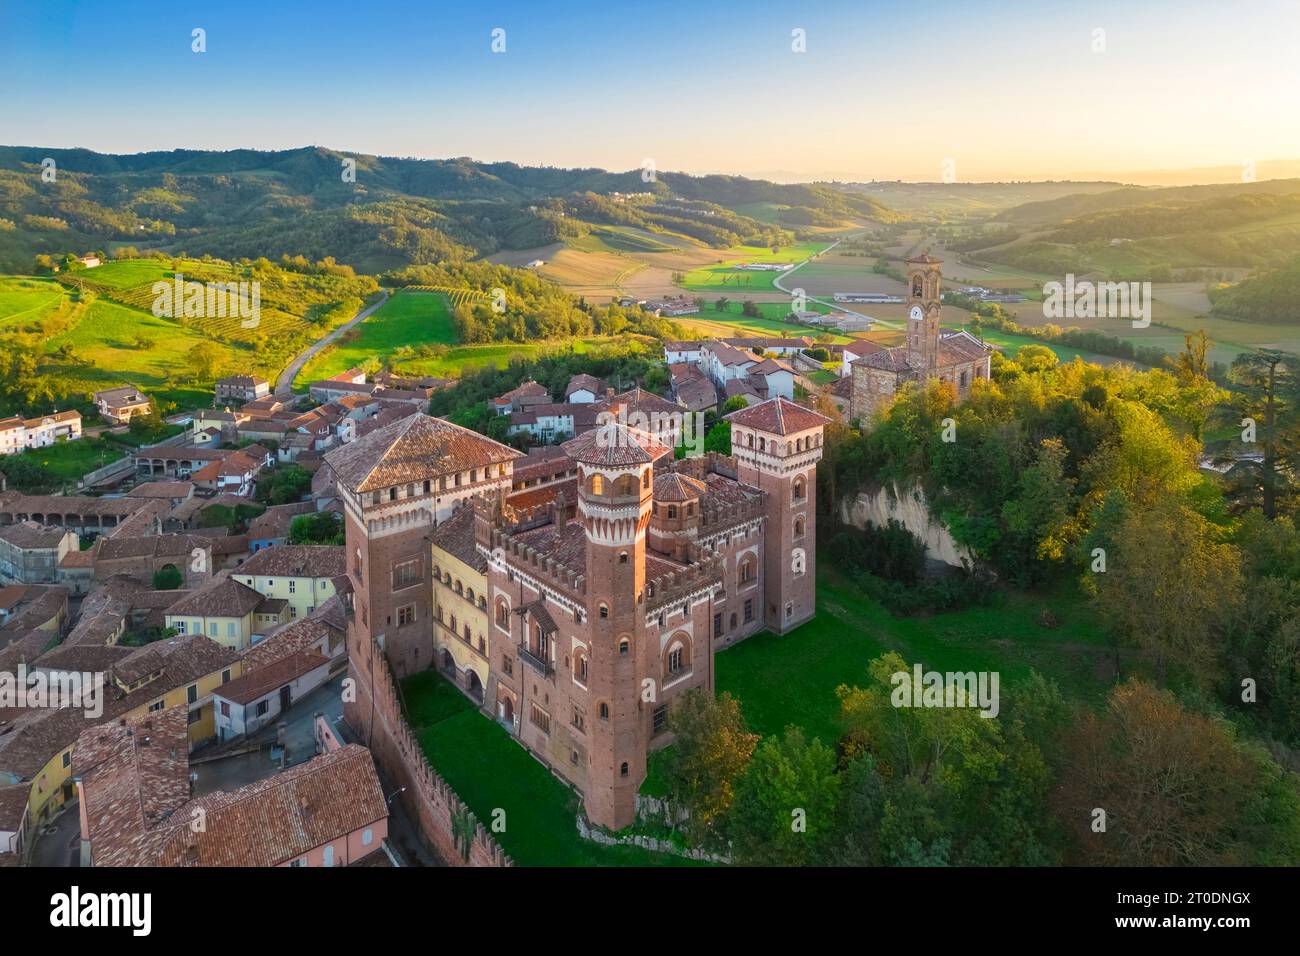 Aerial view at sunset of the Castle of Cereseto, Alessandria district, Monferrato, Piedmont, Italy, Europe. Stock Photo